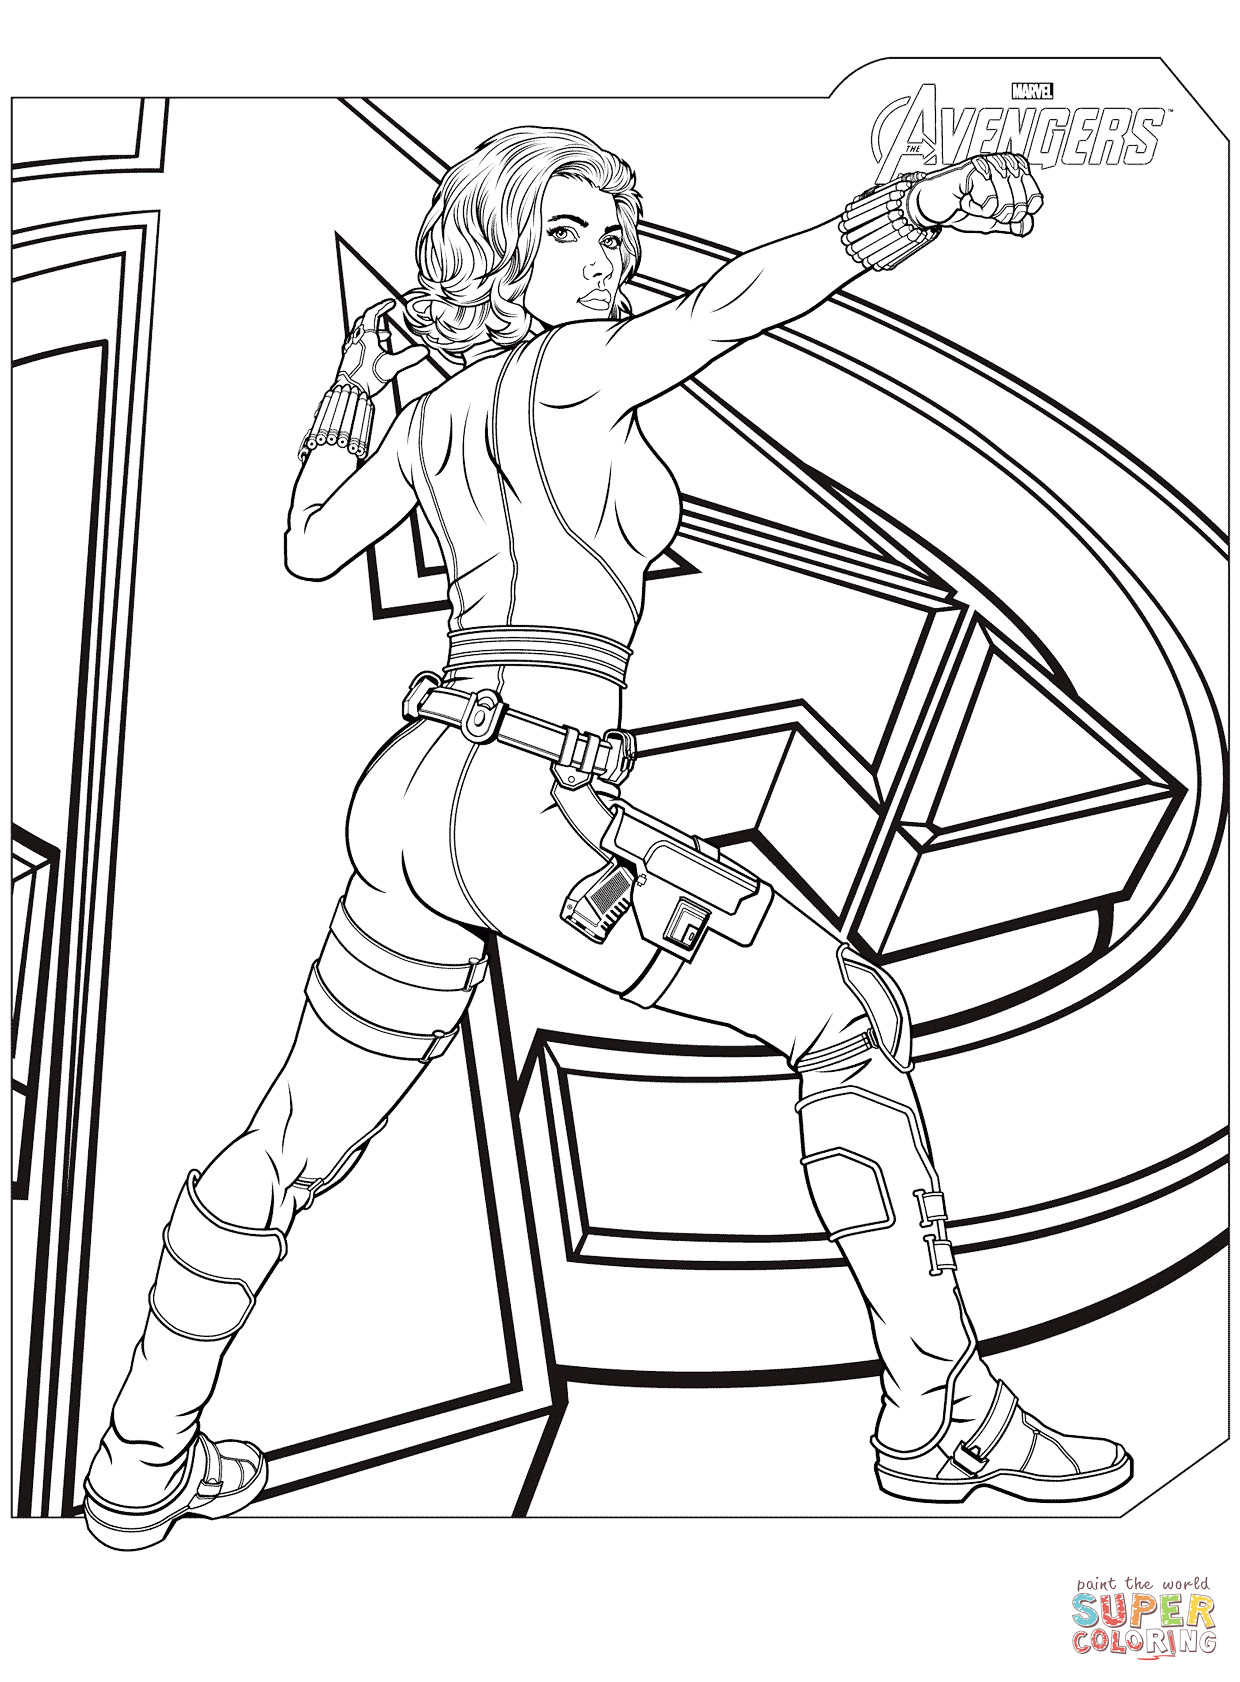 Coloring Pages Avengers
 Avengers Black Widow coloring page